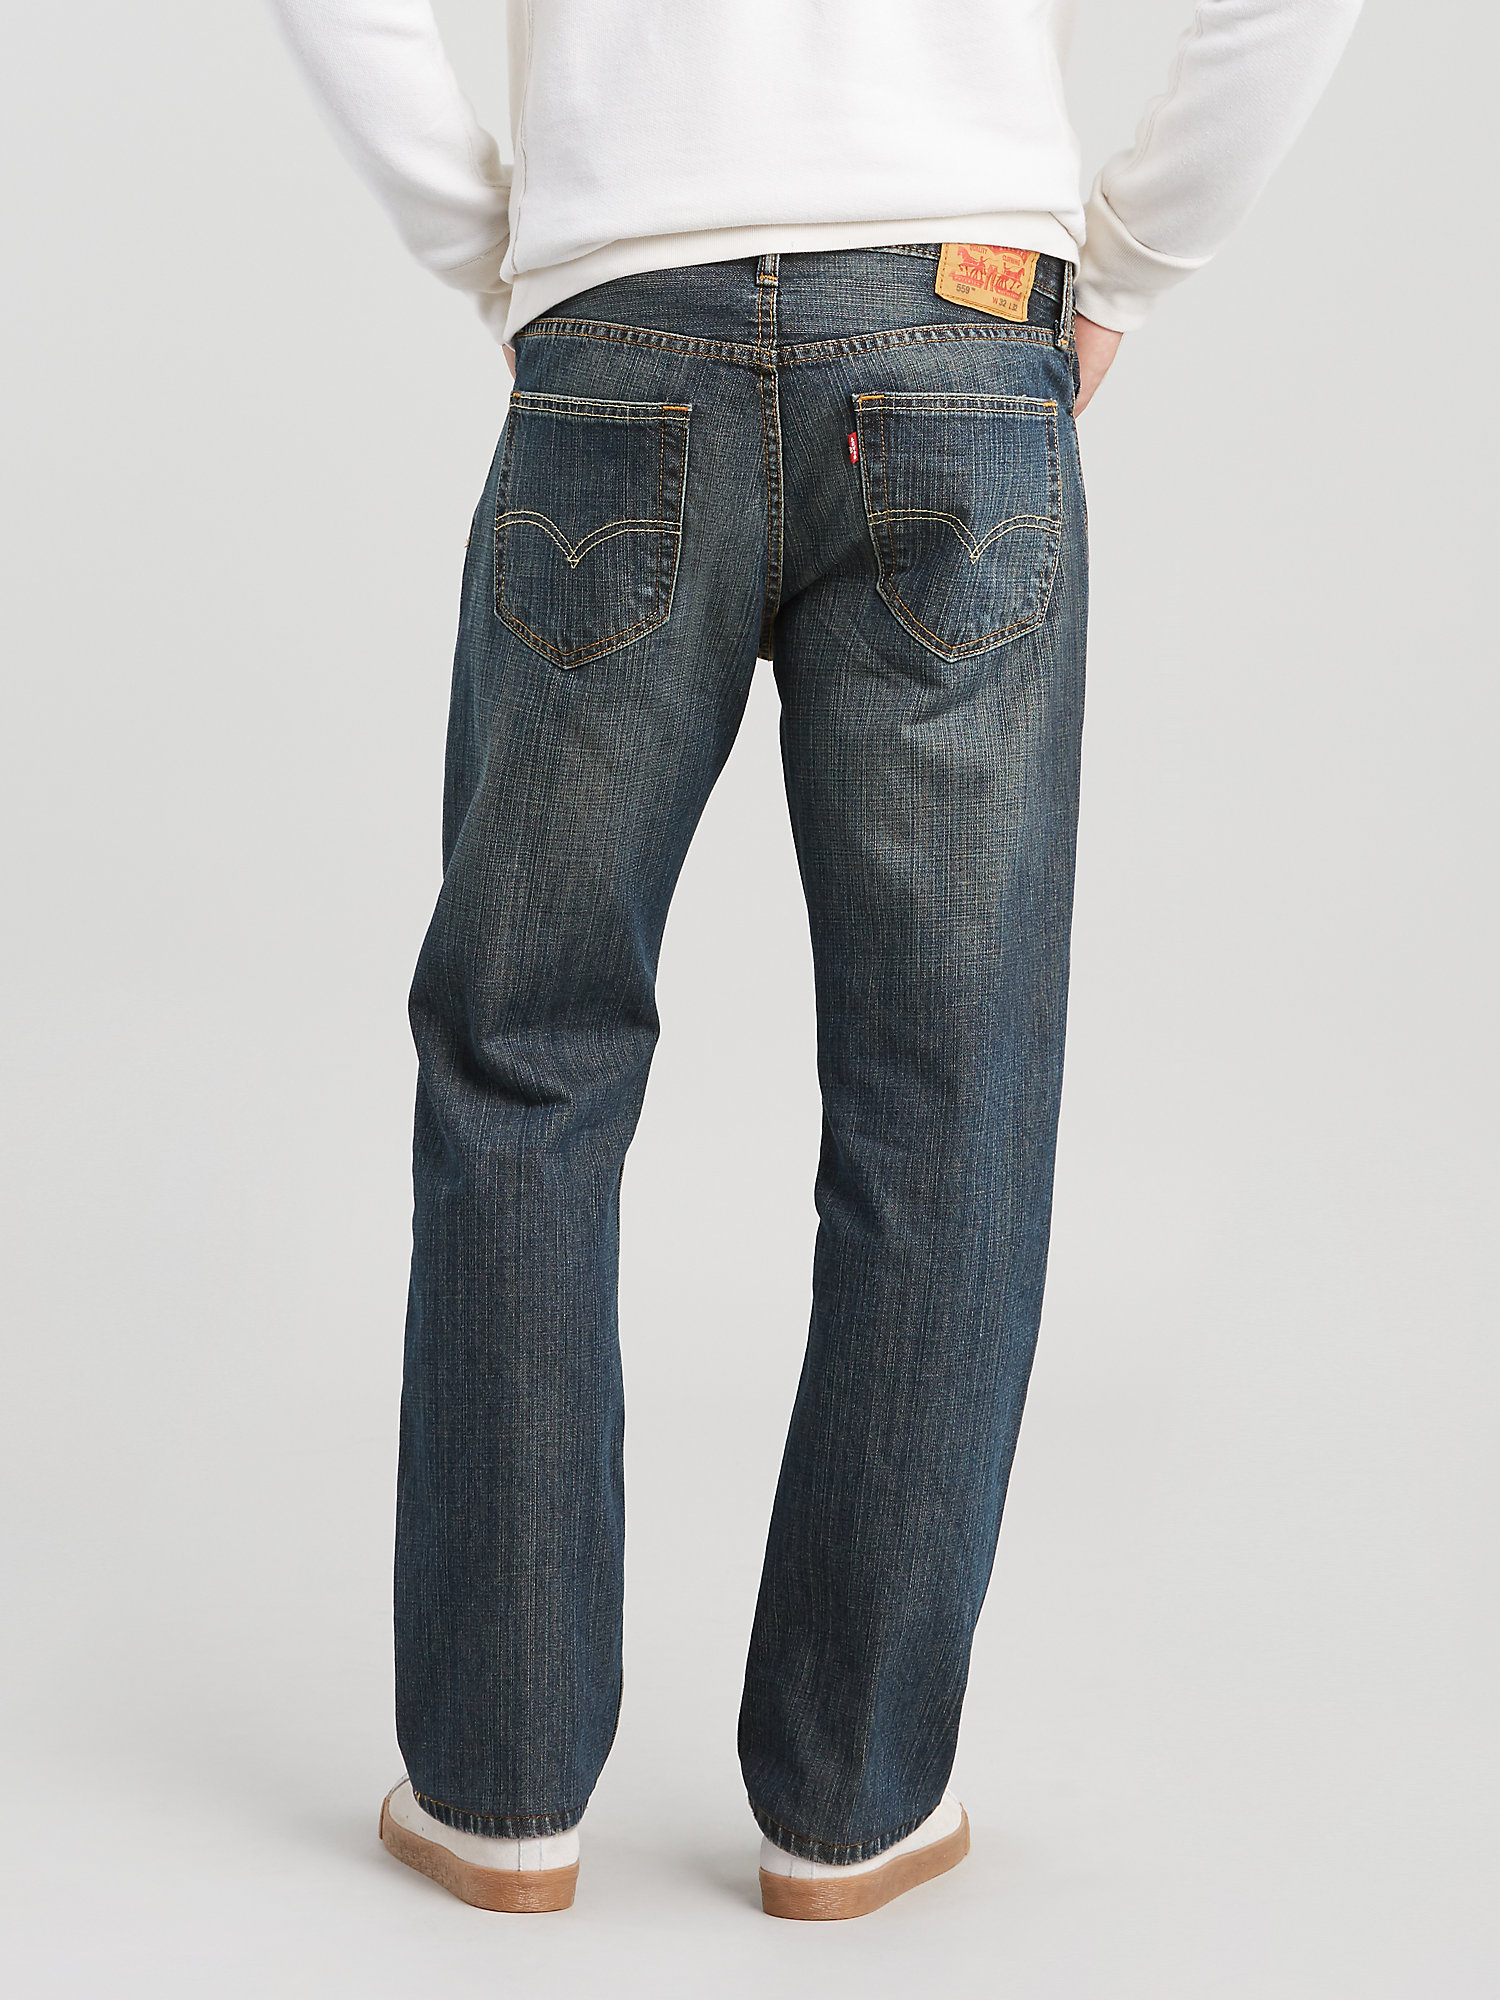 Levi's Men's 559 Relaxed Straight Fit Jeans - image 3 of 7